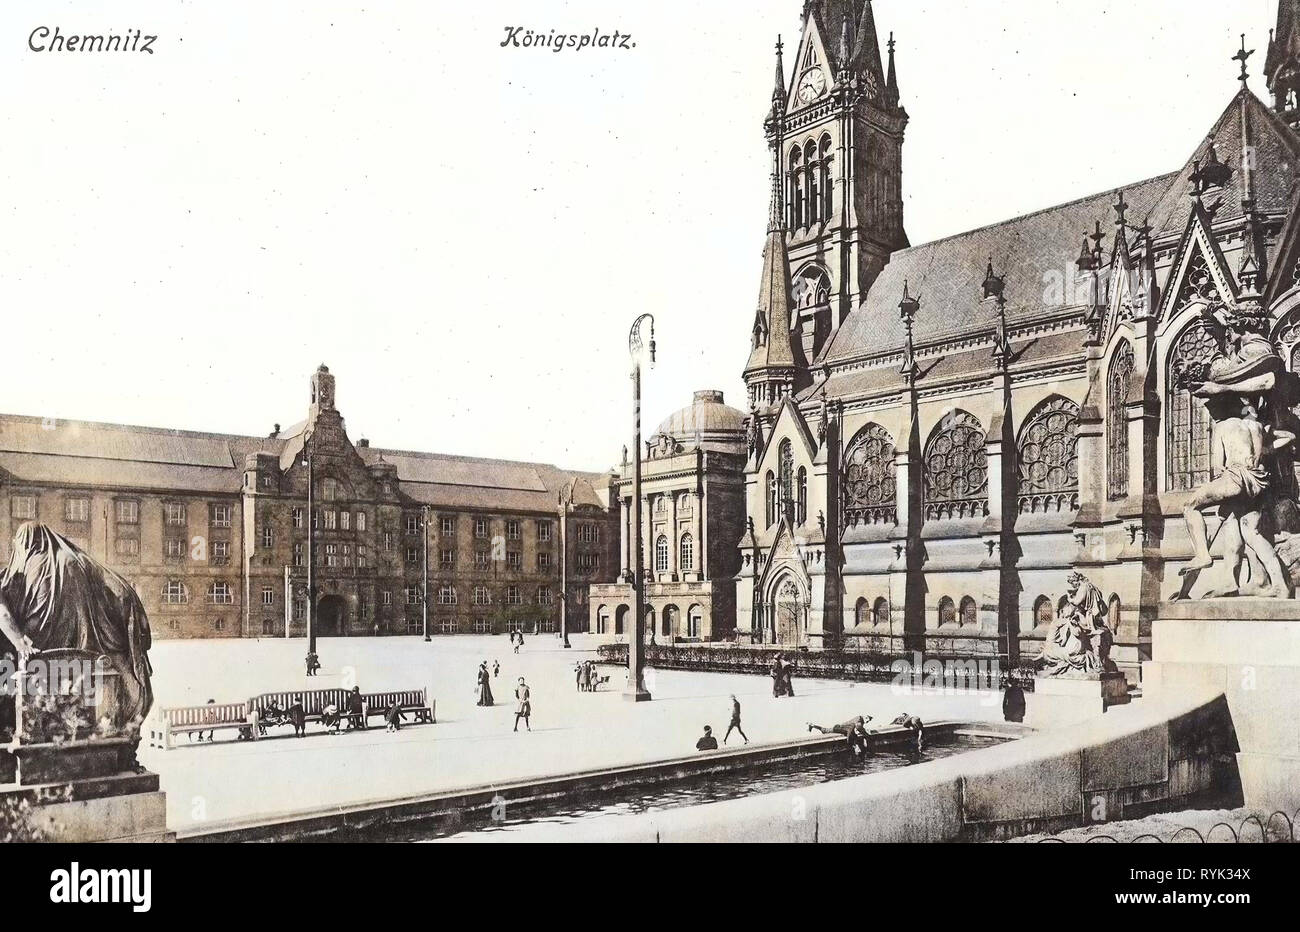 Streets and squares in Chemnitz, Buildings in Chemnitz, Theatre of Germany, St.-Petri-Kirche (Chemnitz), Museums in Chemnitz, Vier Tageszeiten, Sculptures in Chemnitz, 1914, Chemnitz, Königsplatz Stock Photo